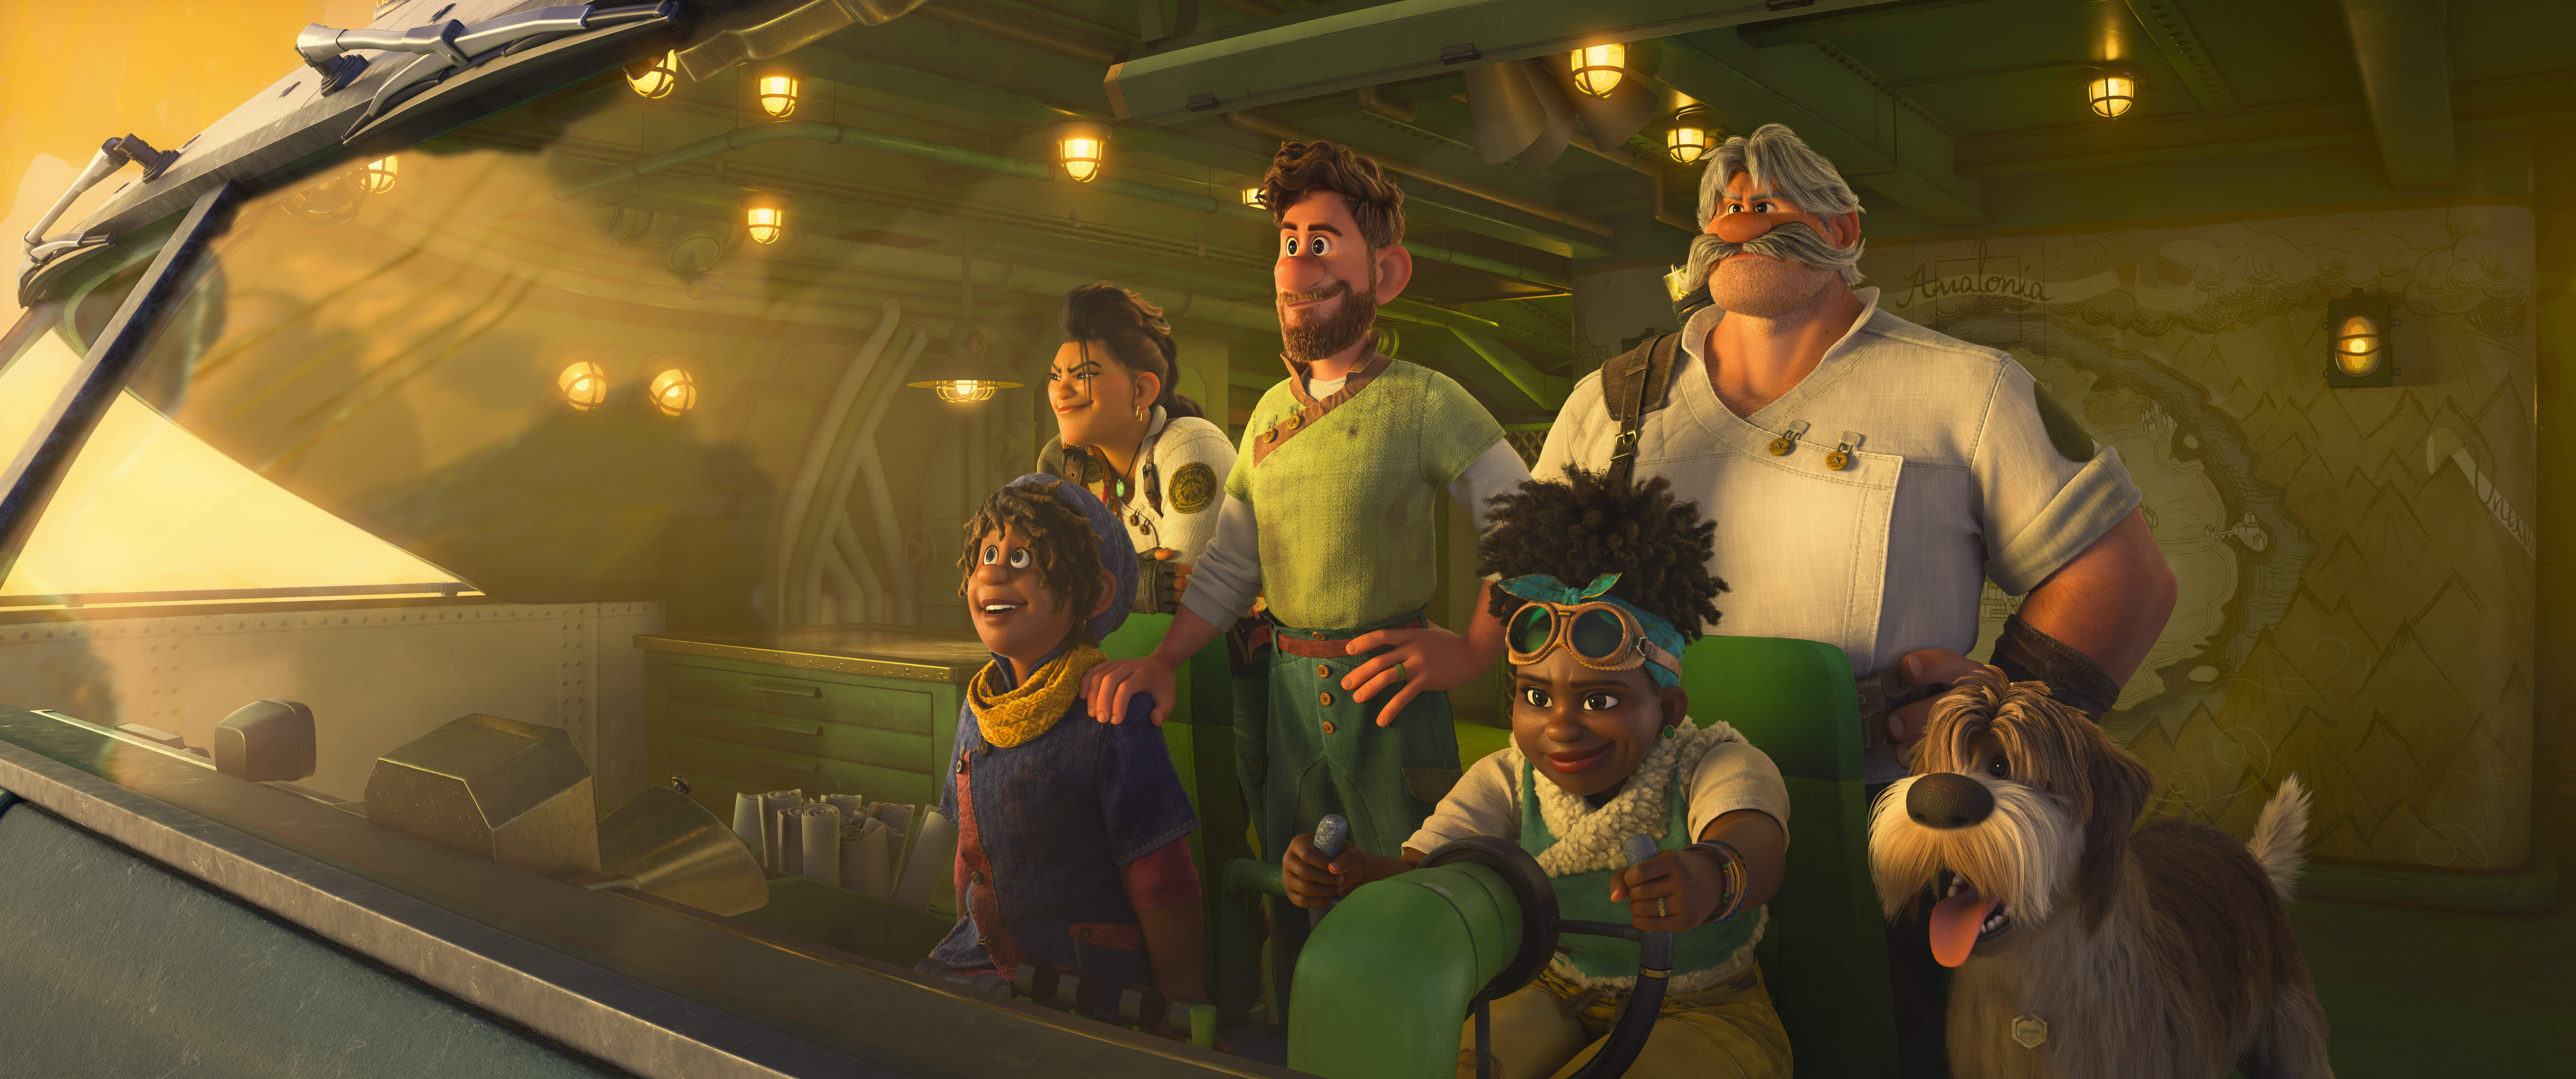 The multigenerational animated cast of Disney’s Strange World stands together on the bridge of a futuristic ship, staring nobly into the future